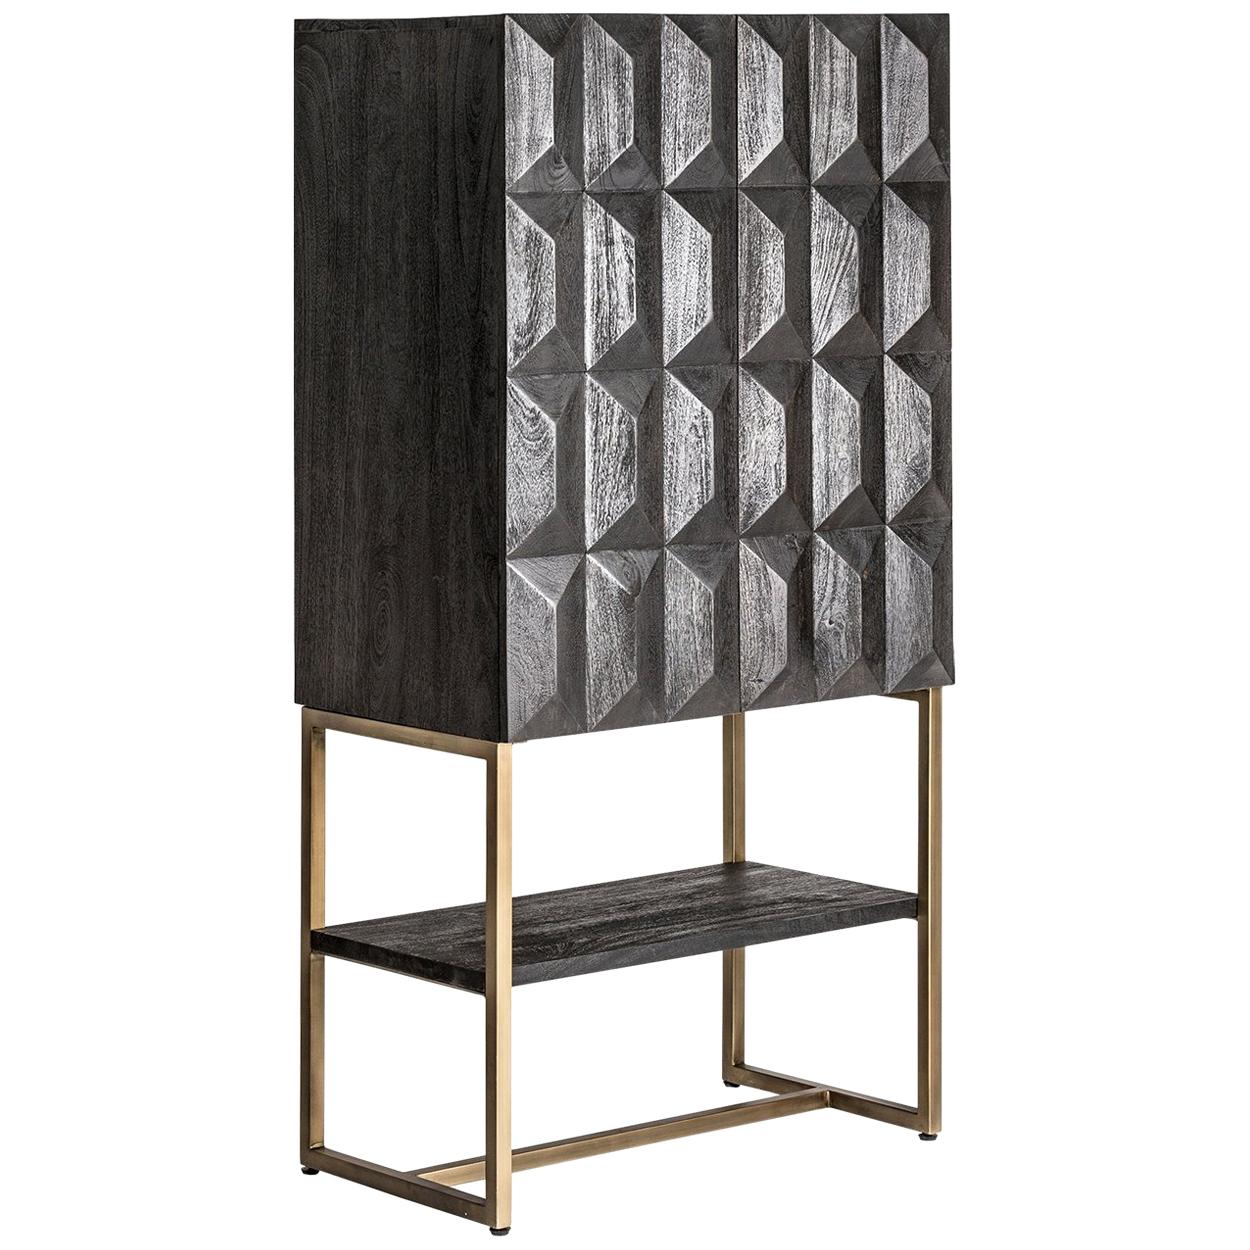 Black Wooden Dry Bar Cabinet Brutalist Style with Graphic Patterns